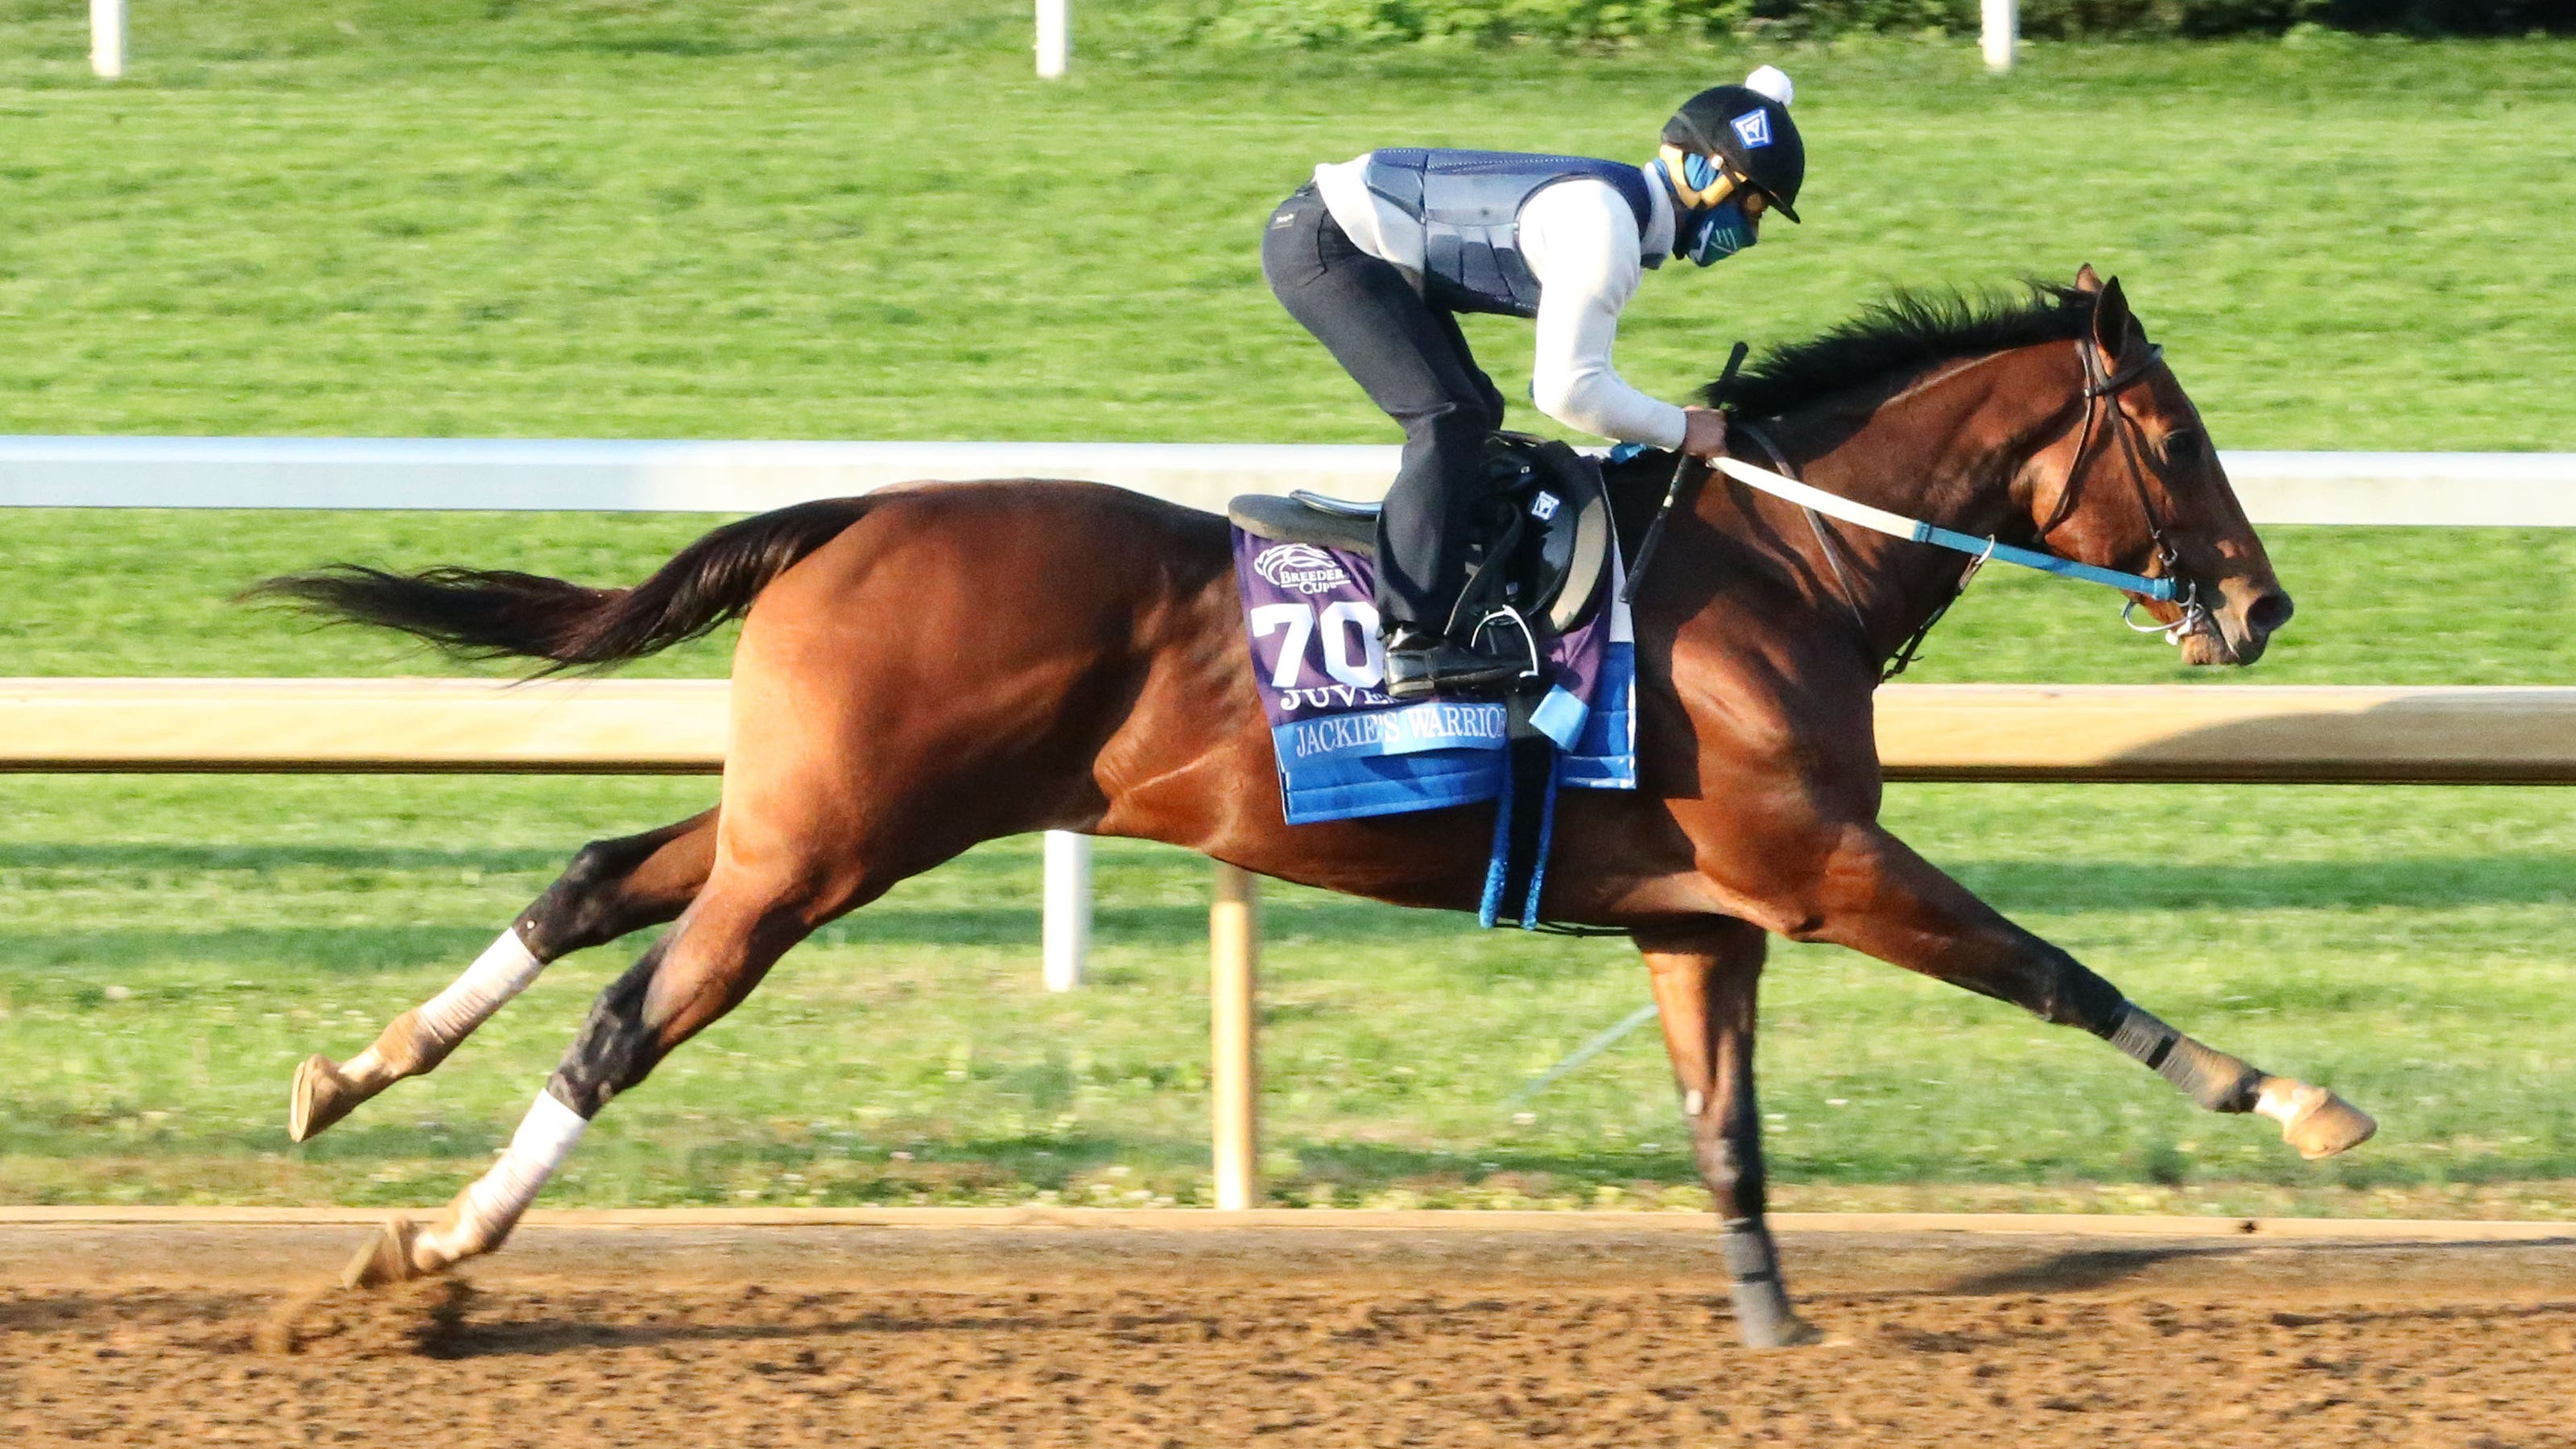 Jackie's Warrior is an early favorite for 2021 Kentucky Derby